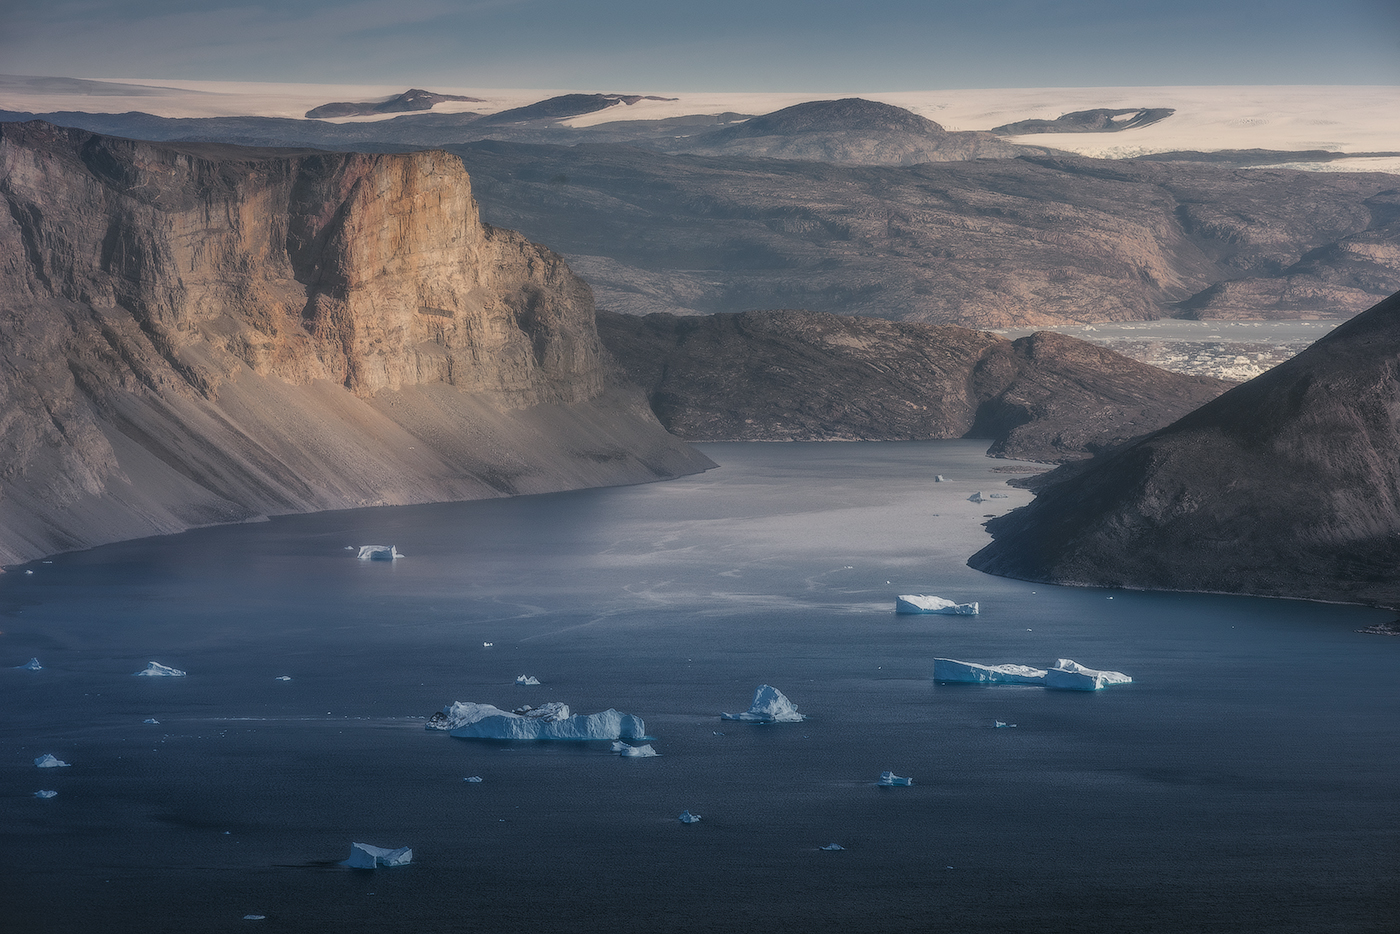 The steep and majestic coastal cliffs of Milne Land in Greenland.